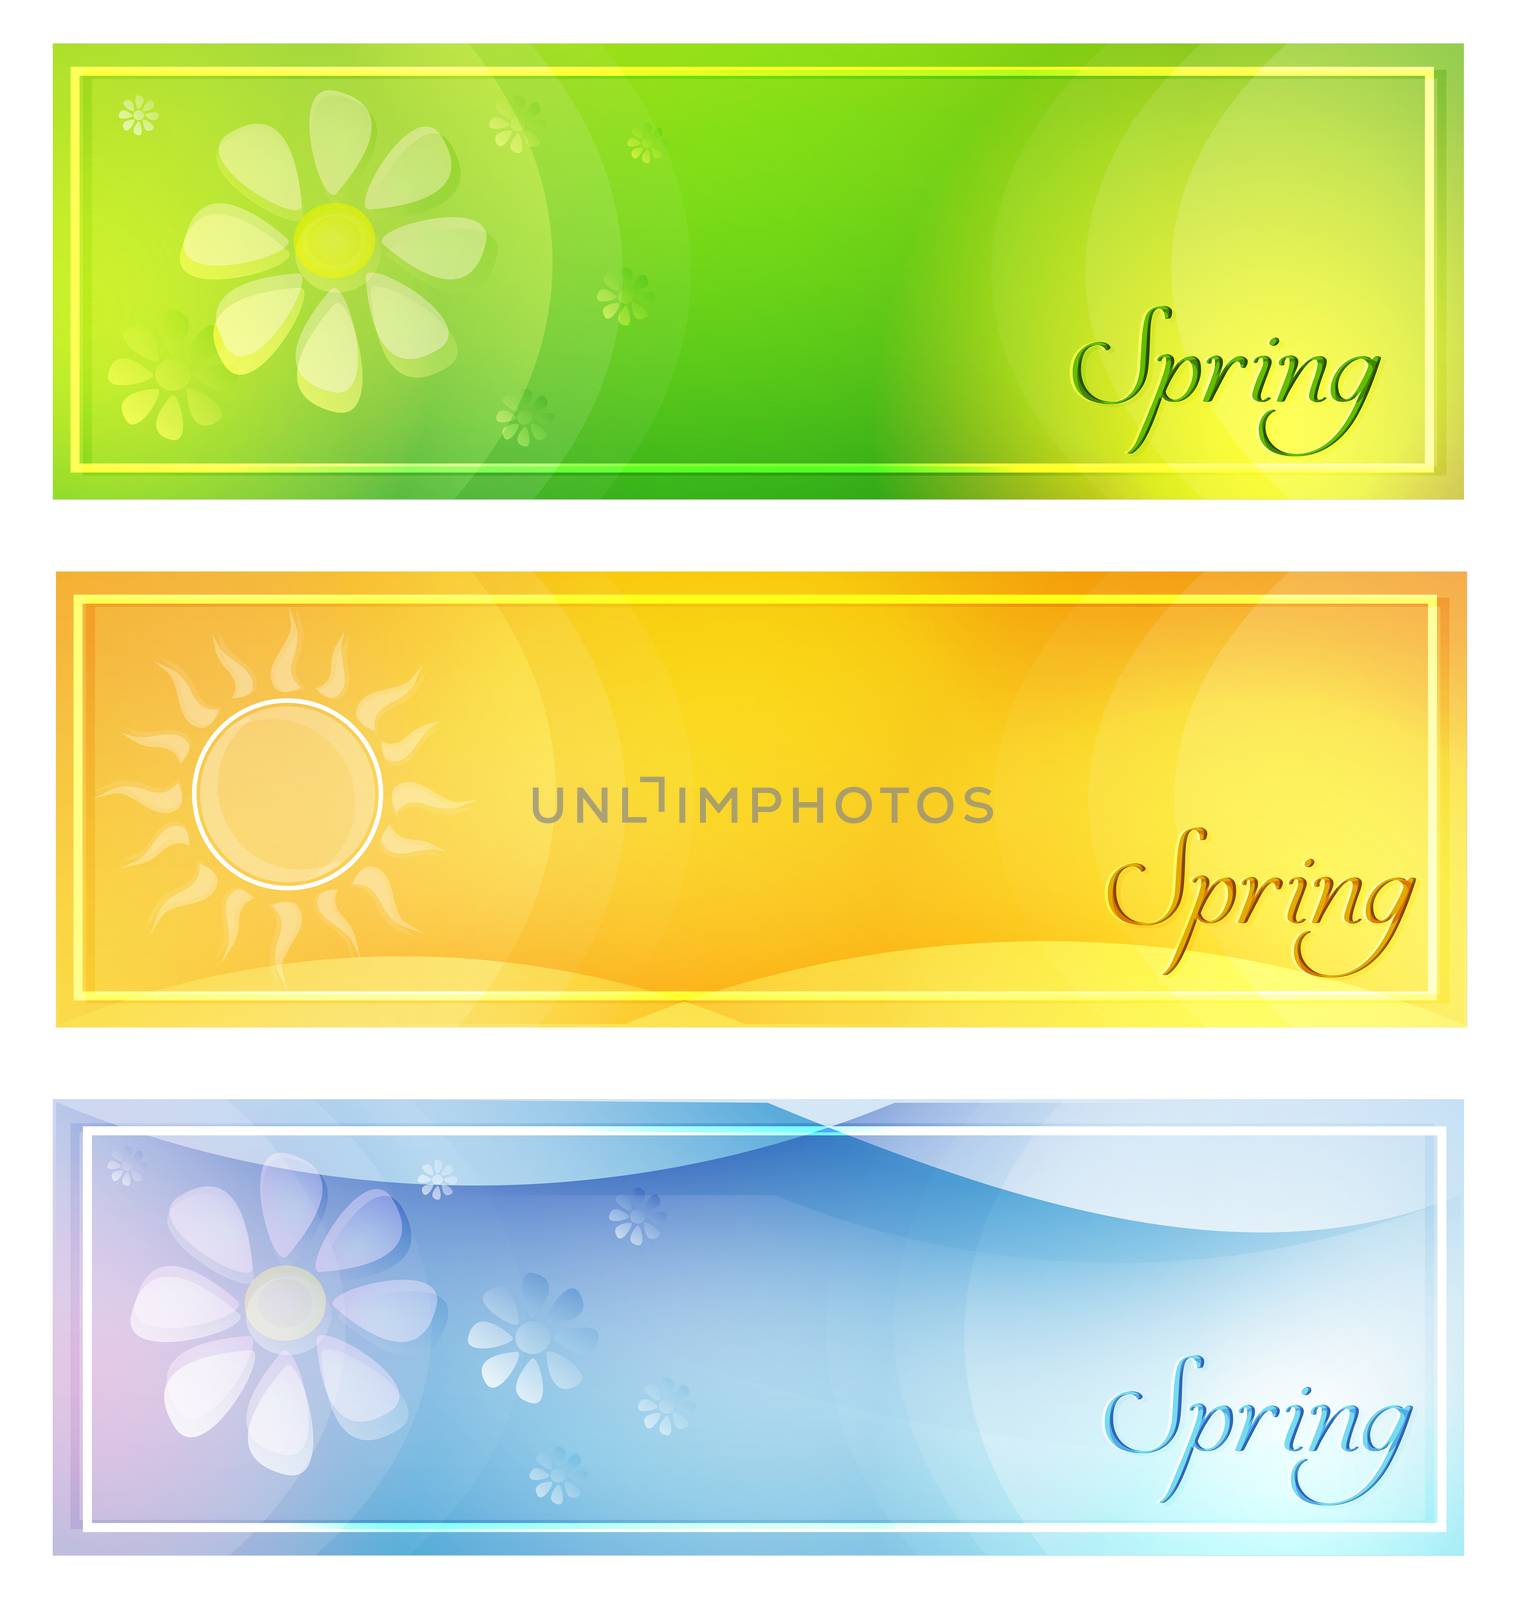 text spring with sun and flowers in banners with frame over green yellow and blue backgrounds, seasonal flat design labels